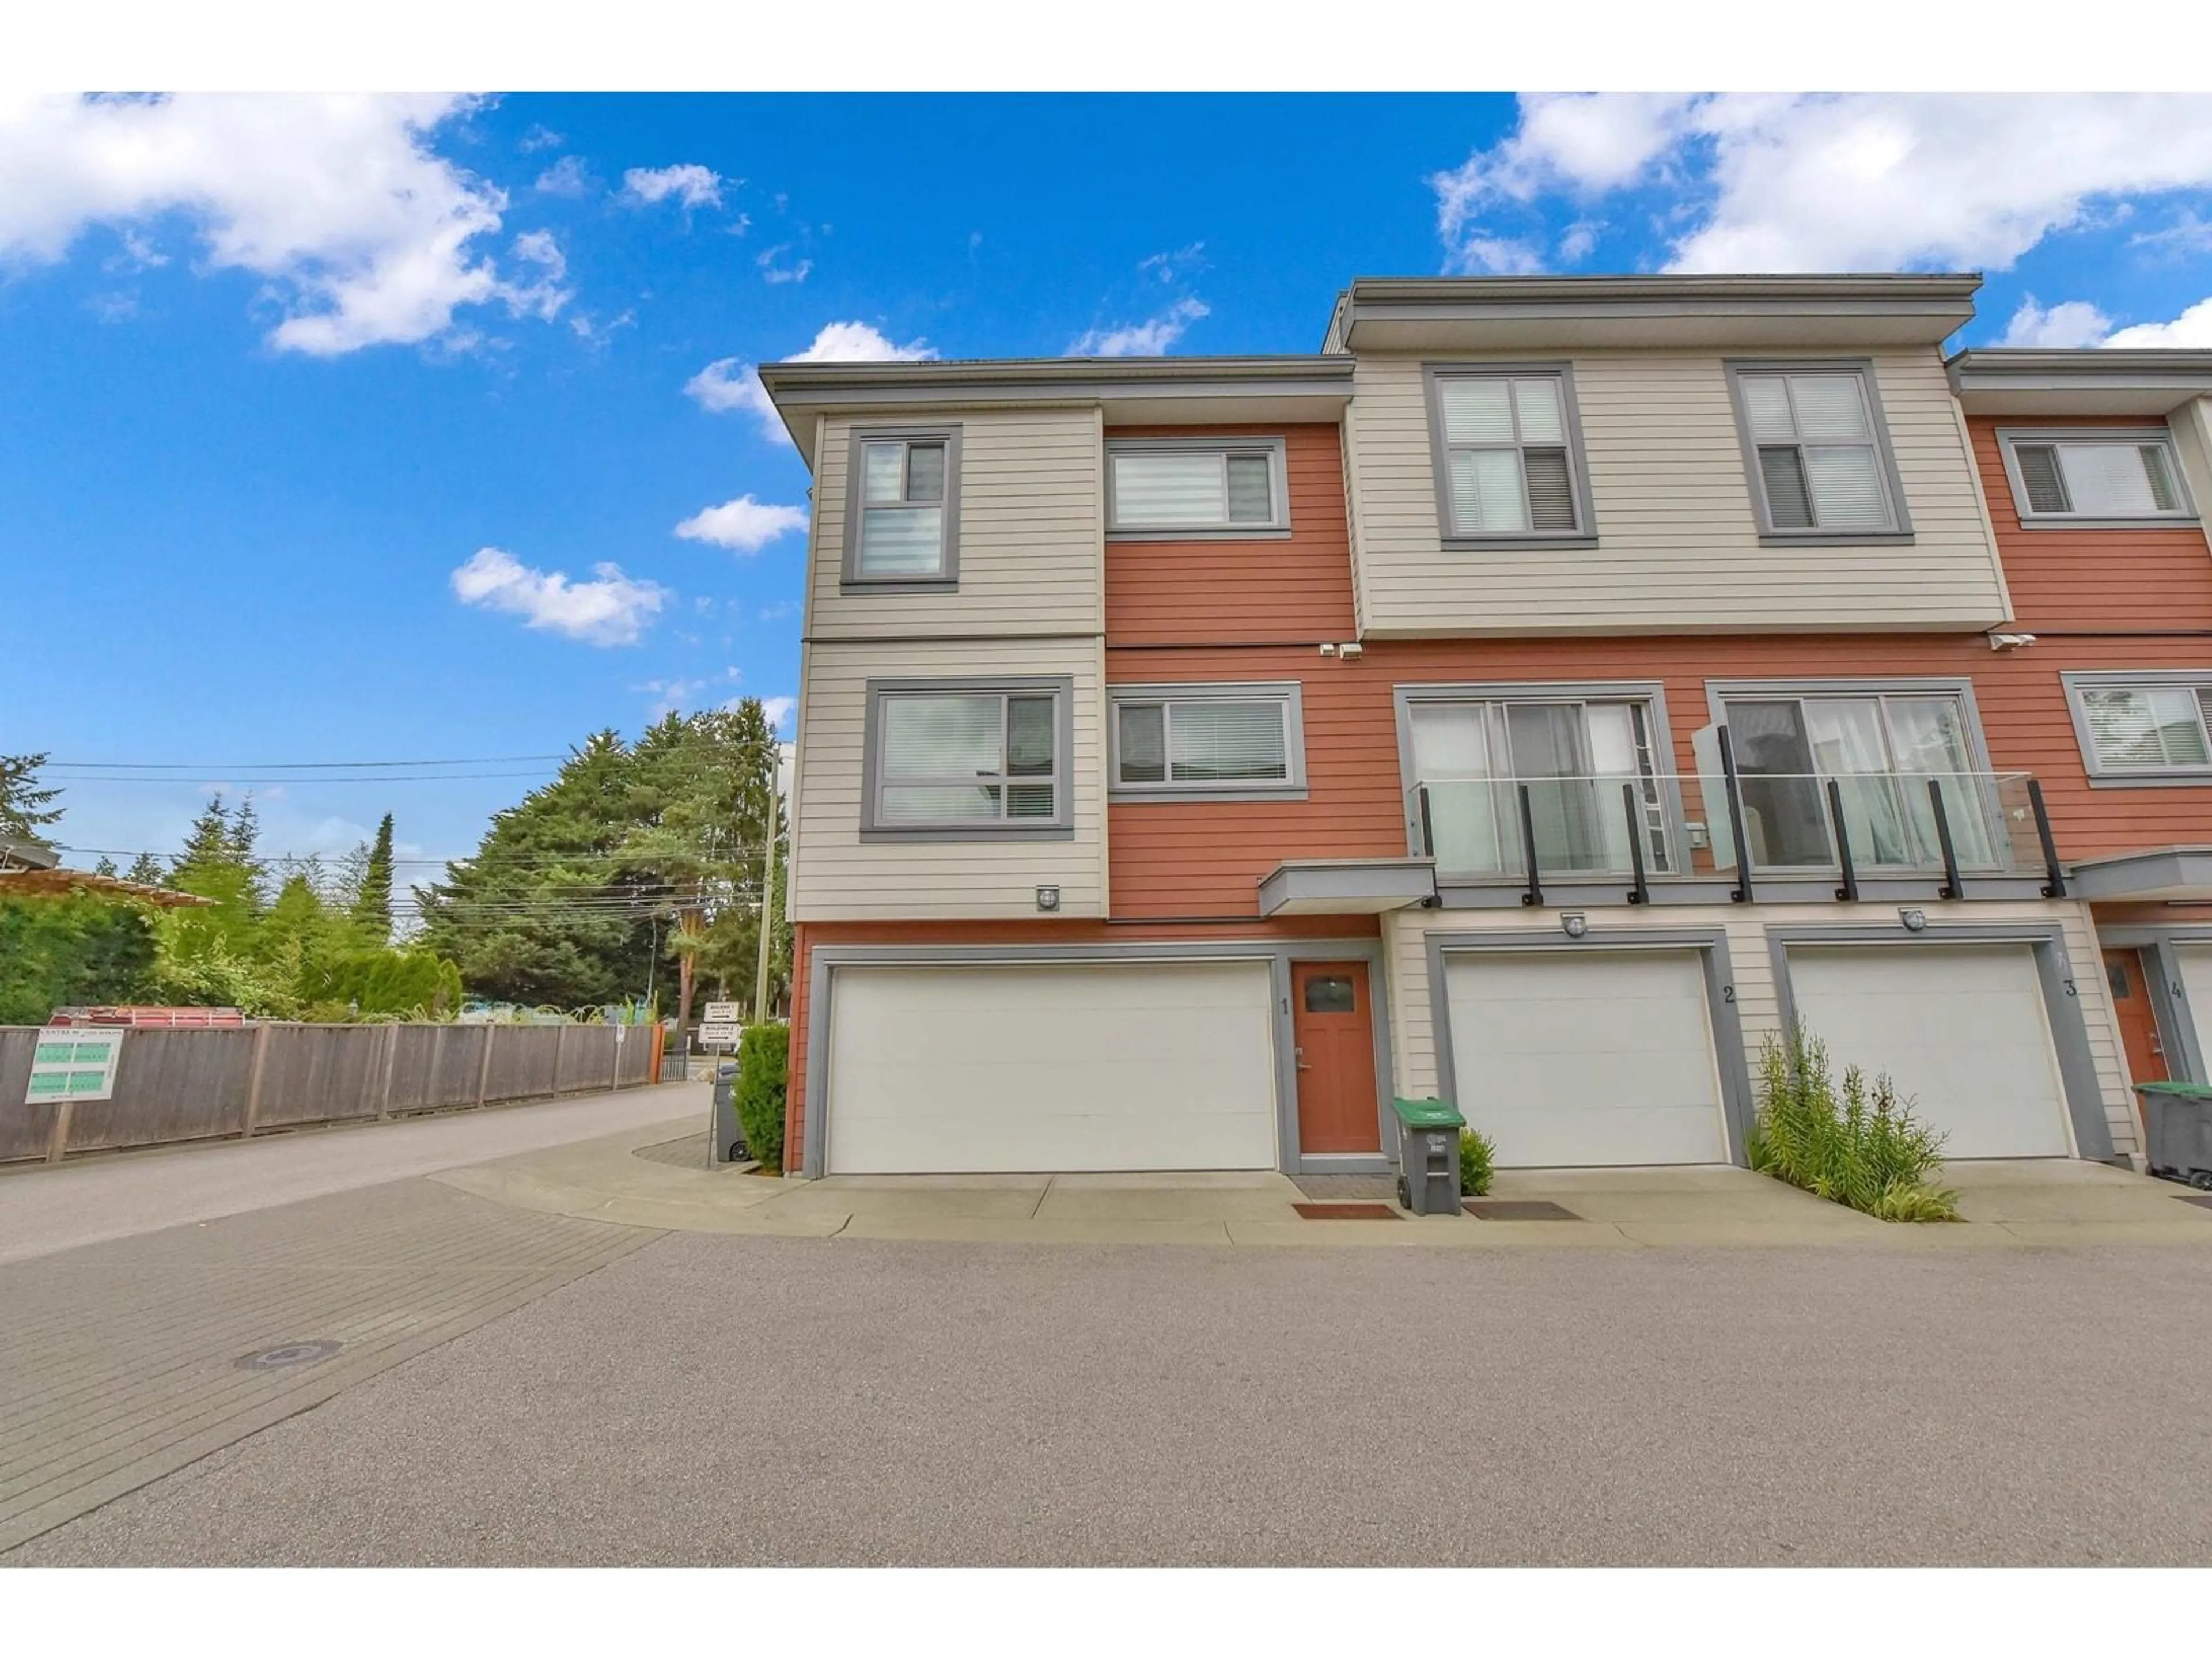 A pic from exterior of the house or condo for 1 13328 96 AVENUE, Surrey British Columbia V3V1Y4